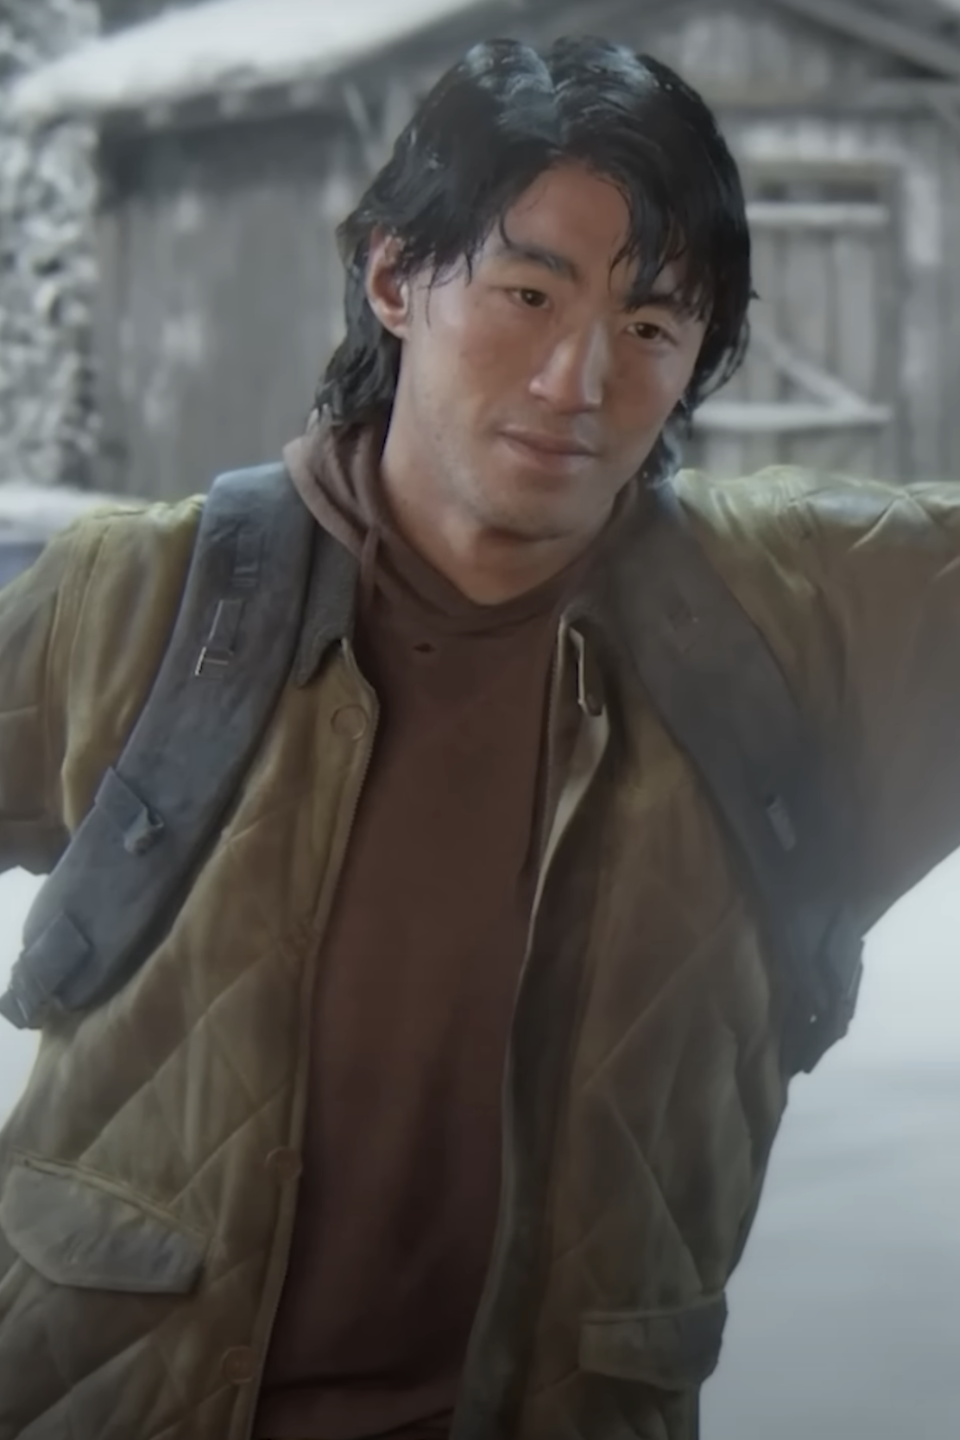 Jesse in The Last of Us in a winter setting wearing a quilted jacket and looking toward the viewer